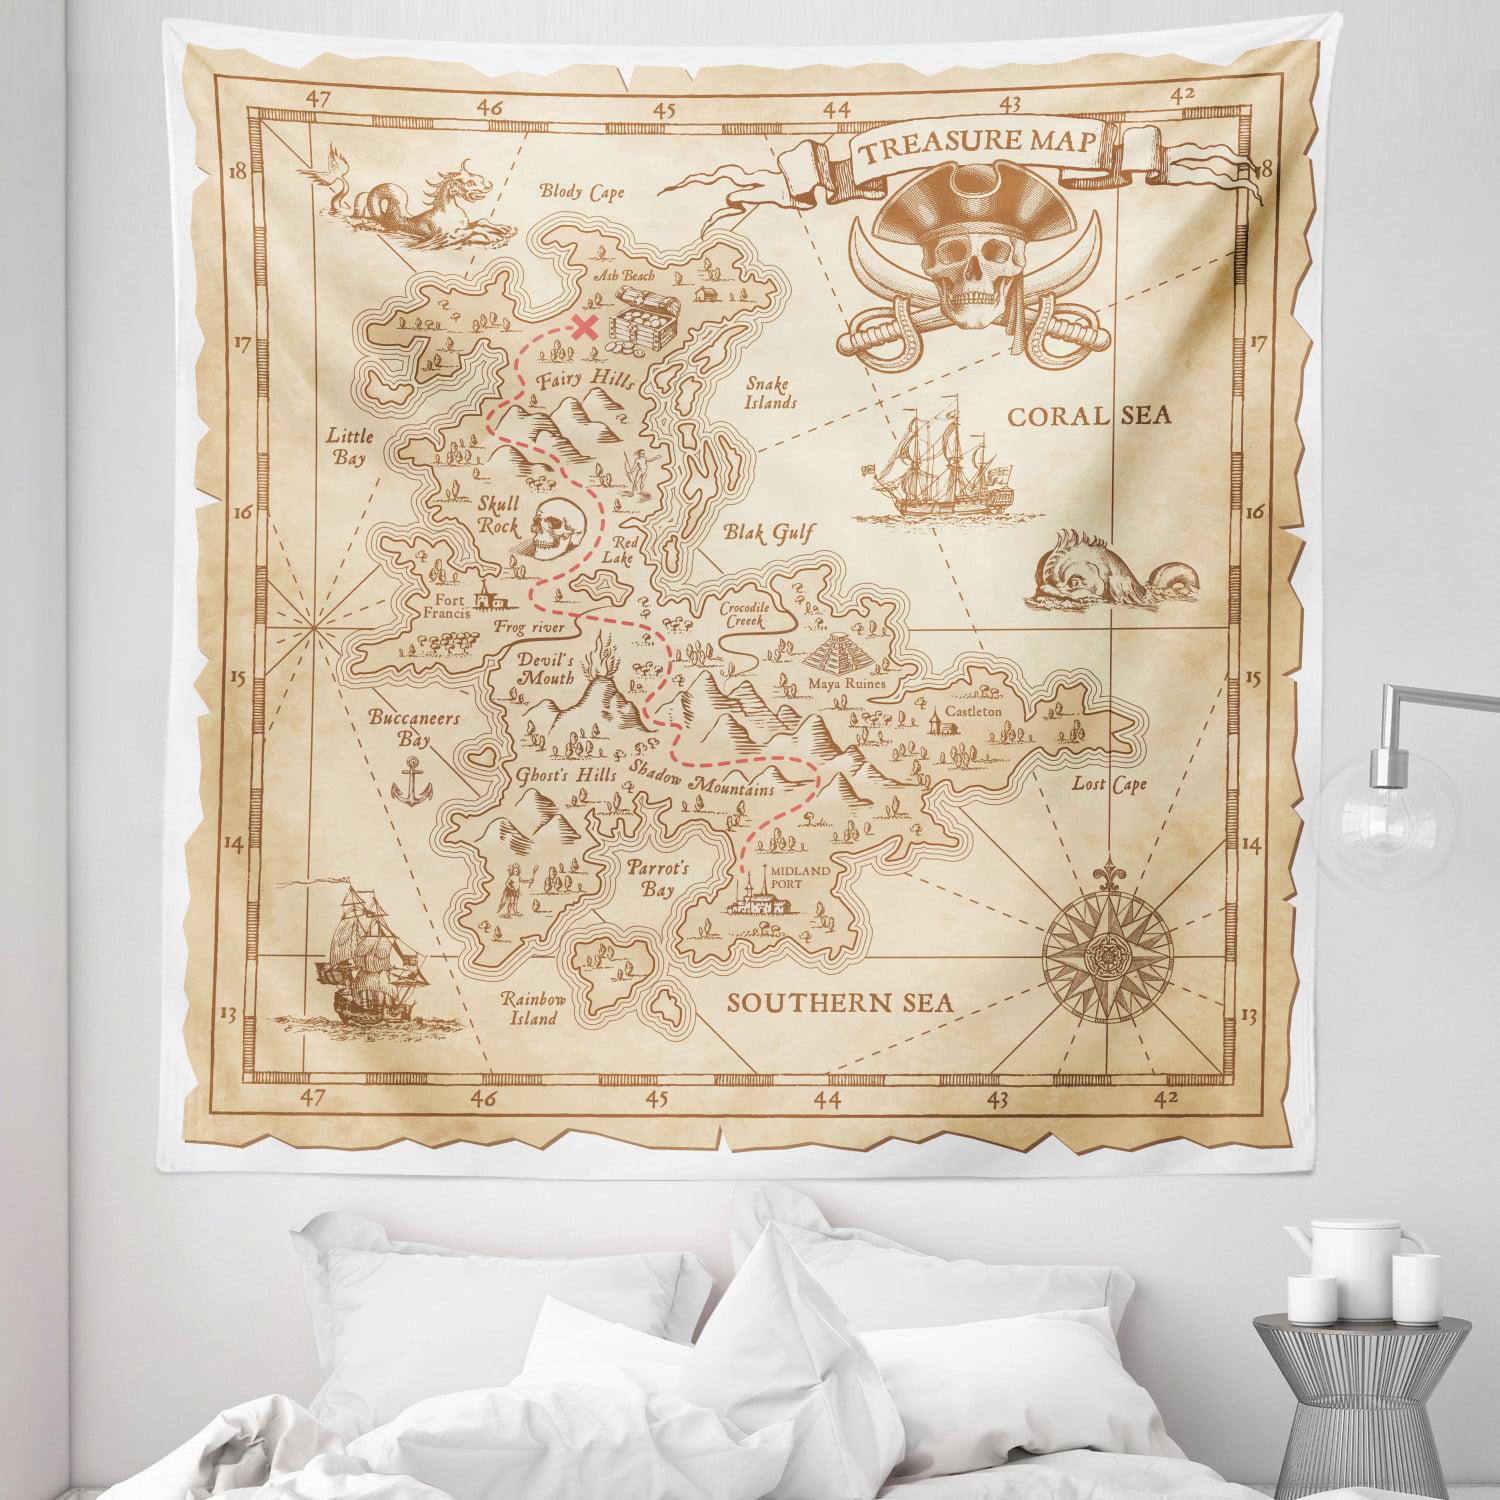 Vintage Pirate Ship Map Bedroom Tapestry Wall Hanging Home Blankets Dorm Decor 